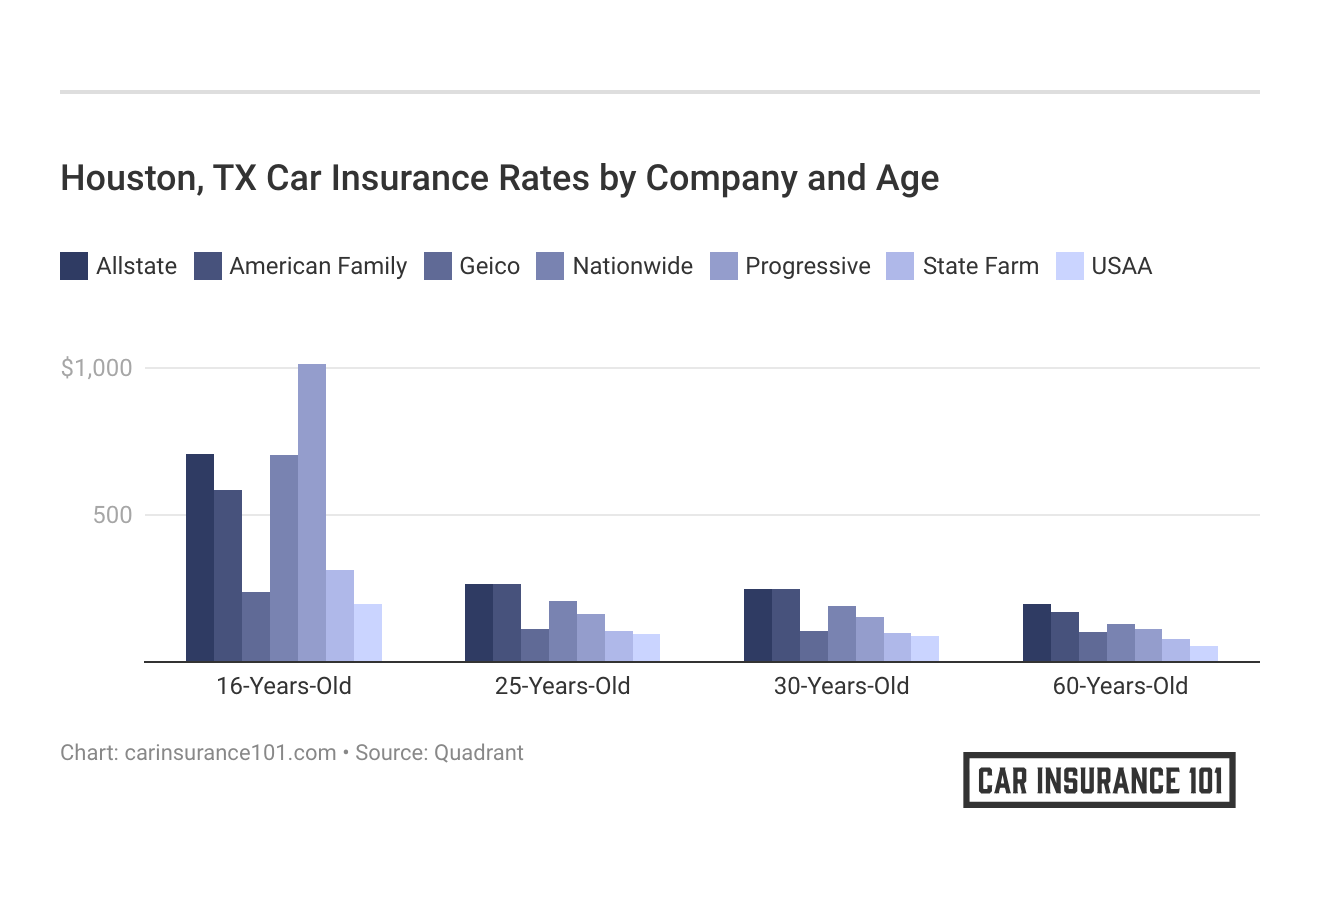 <h3>Houston, TX Car Insurance Rates by Company and Age</h3>